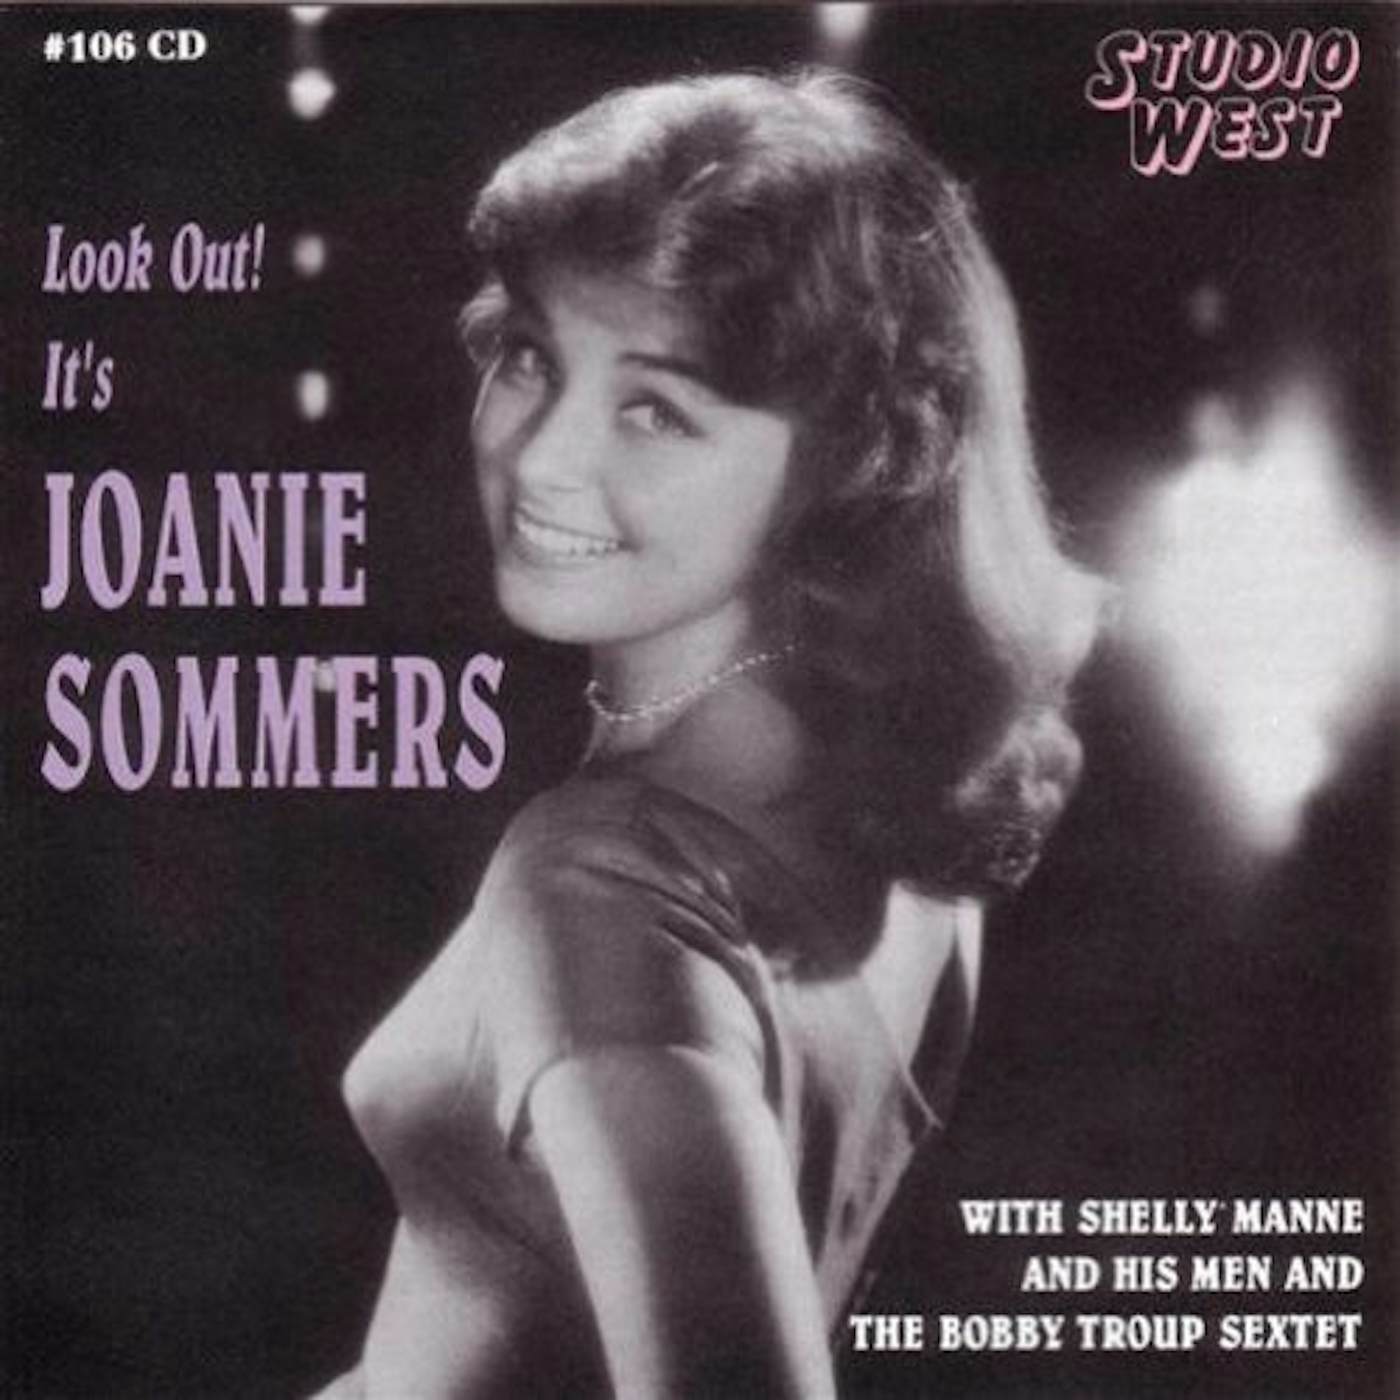 LOOK OUT IT'S JOANIE SOMMERS CD